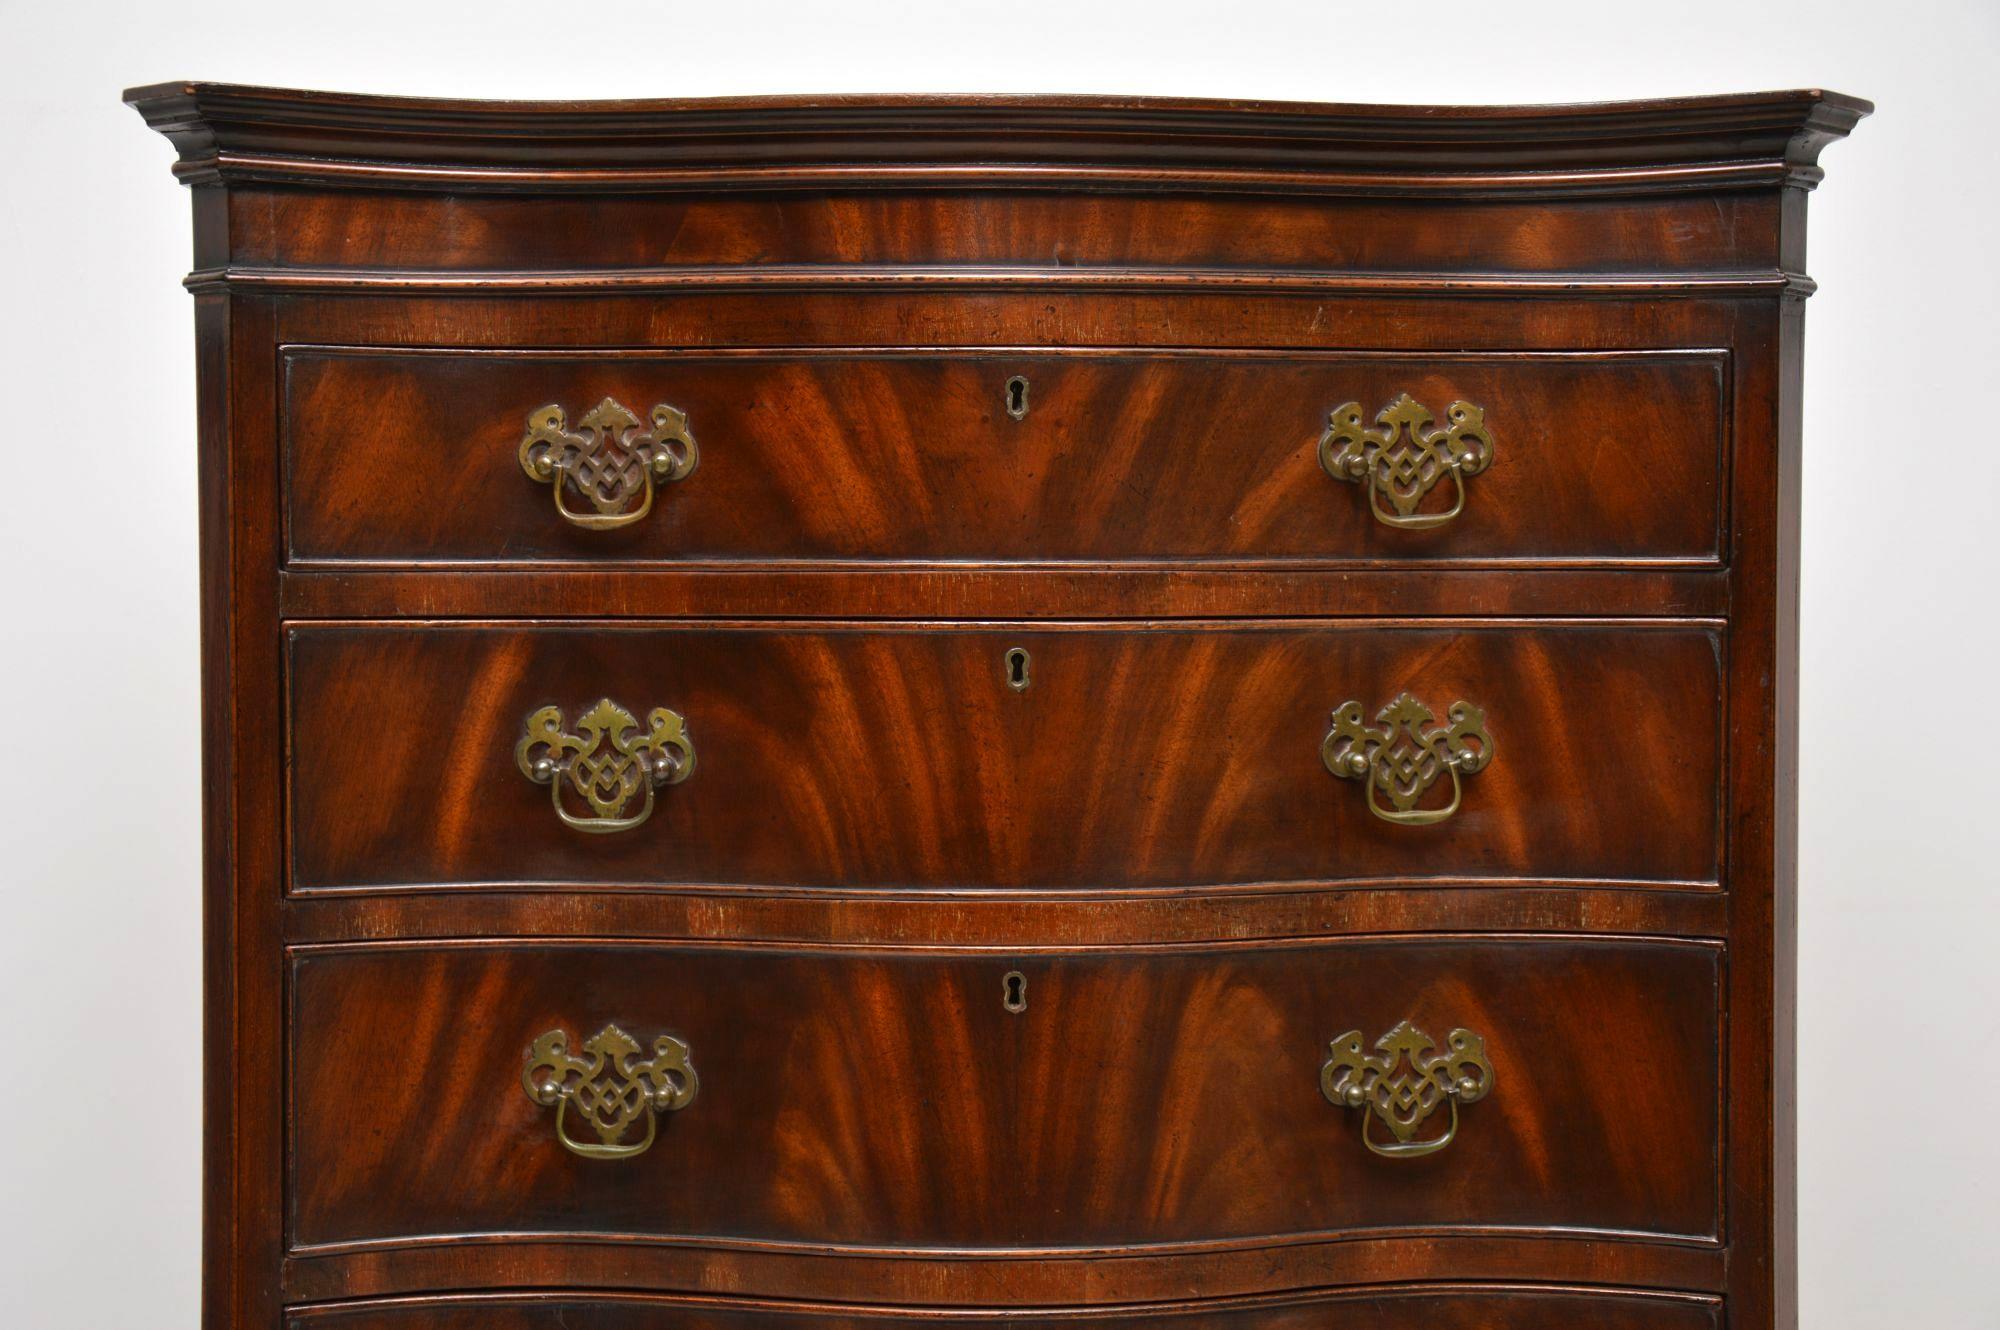 This antique mahogany serpentine fronted chest on chest is extremely fine quality and in excellent condition. It has a wonderfully patterned flame mahogany running though all the drawers. The drawers are all graduated in depth, with original brass